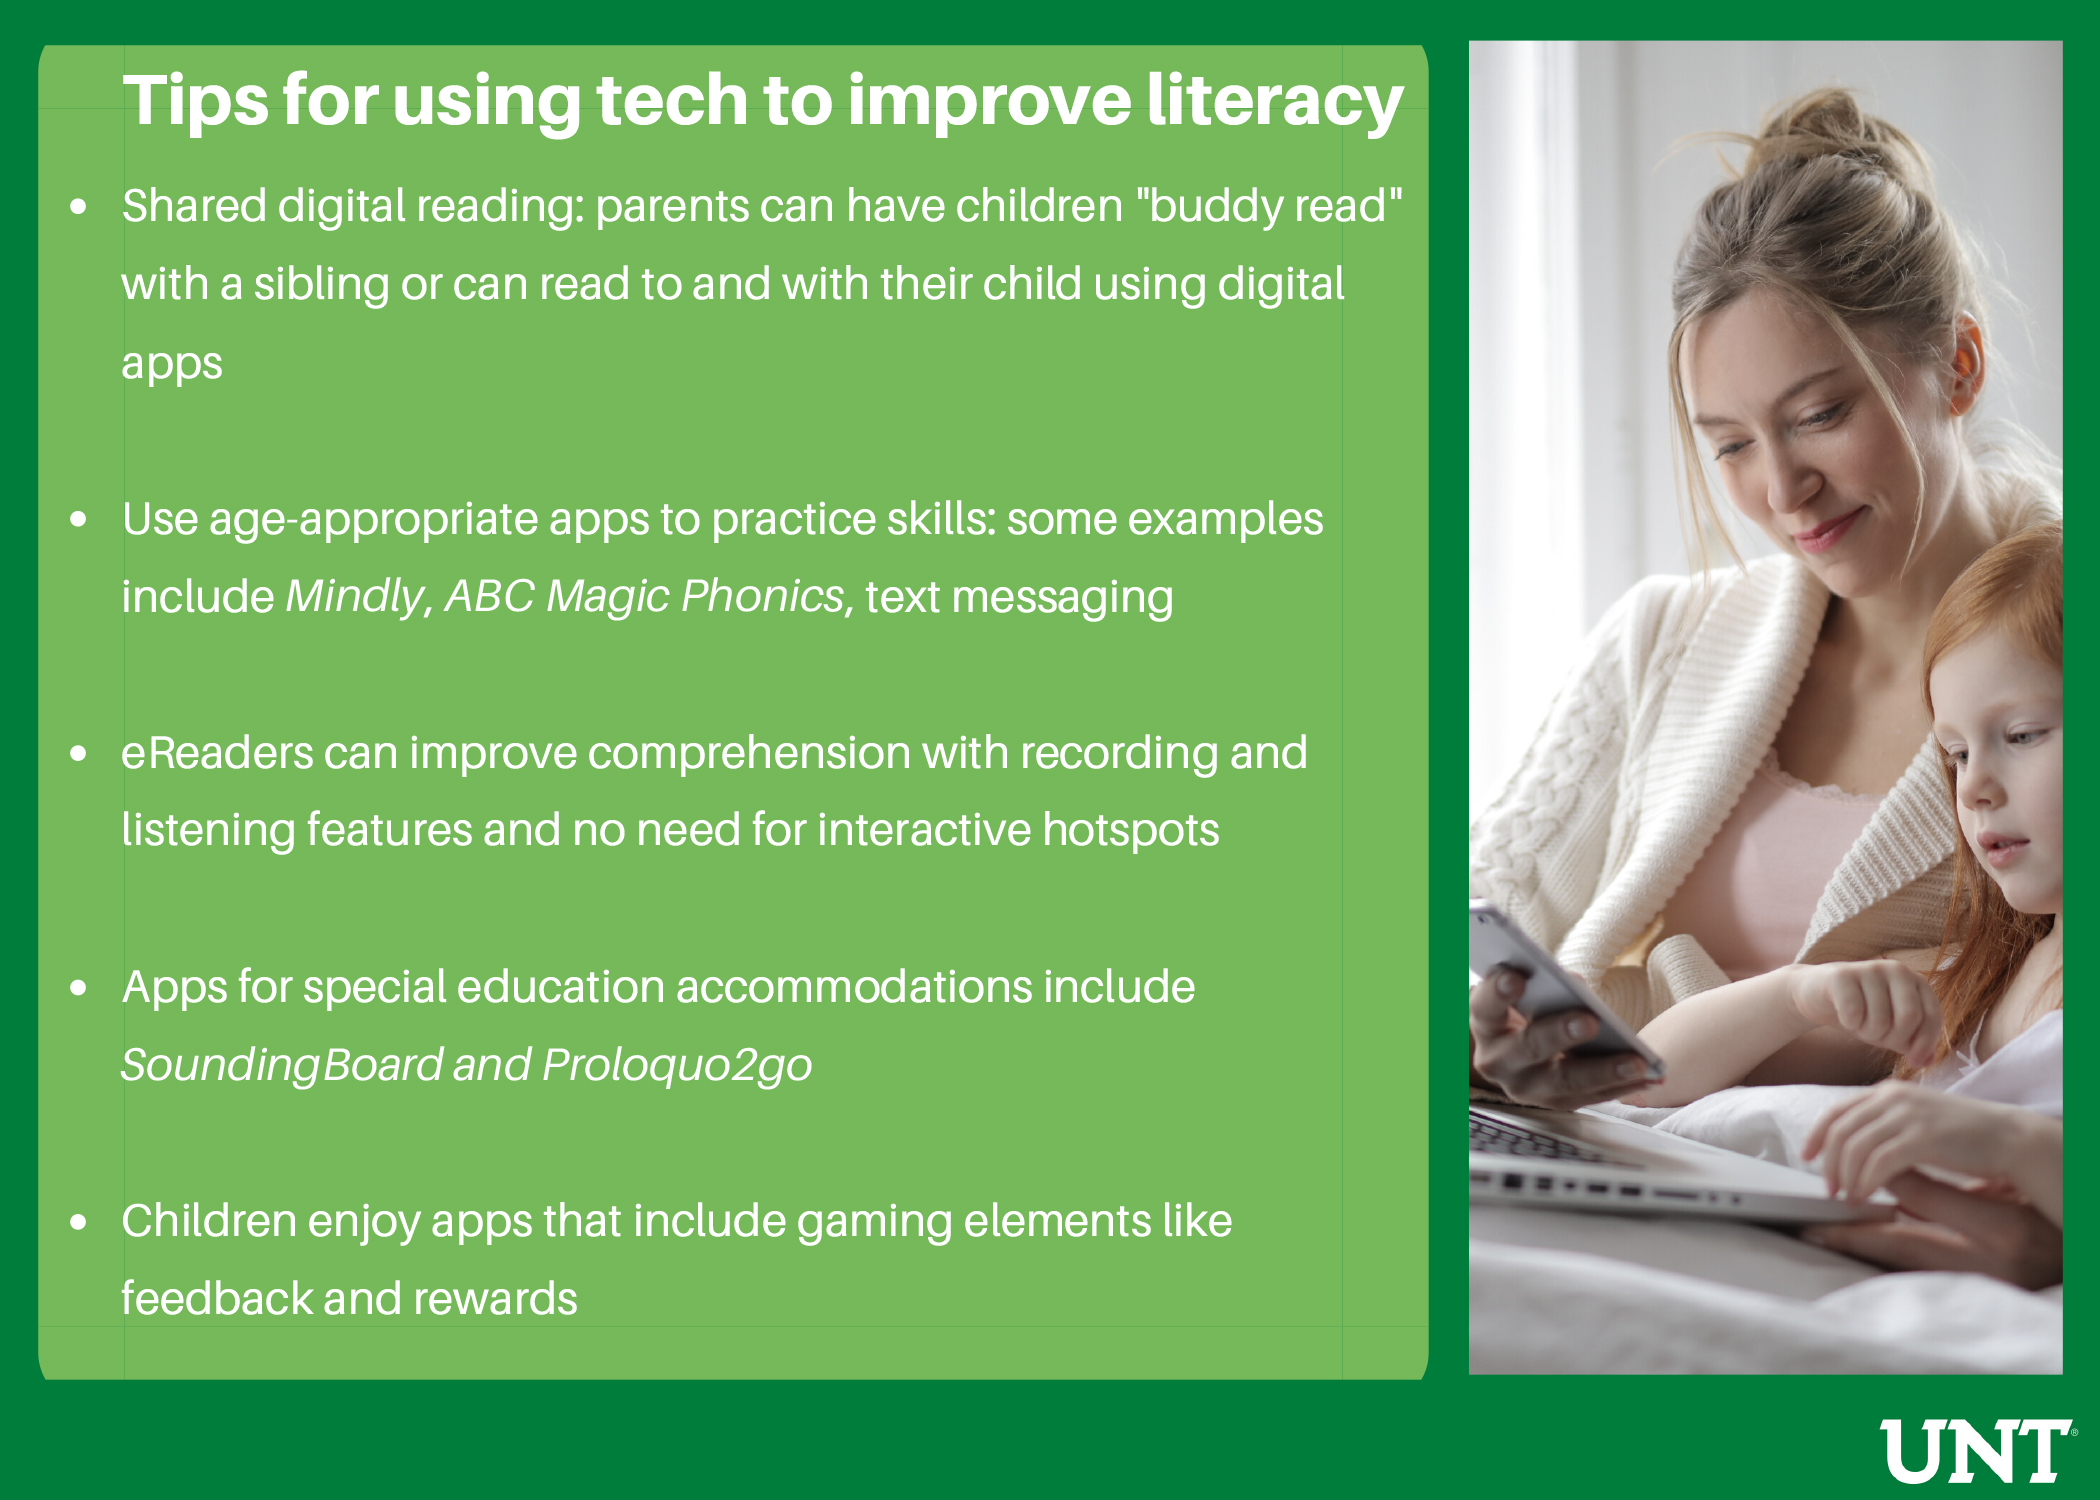 Tips for using tech to improve lteracy. - Shared digital reading: parents can have children 